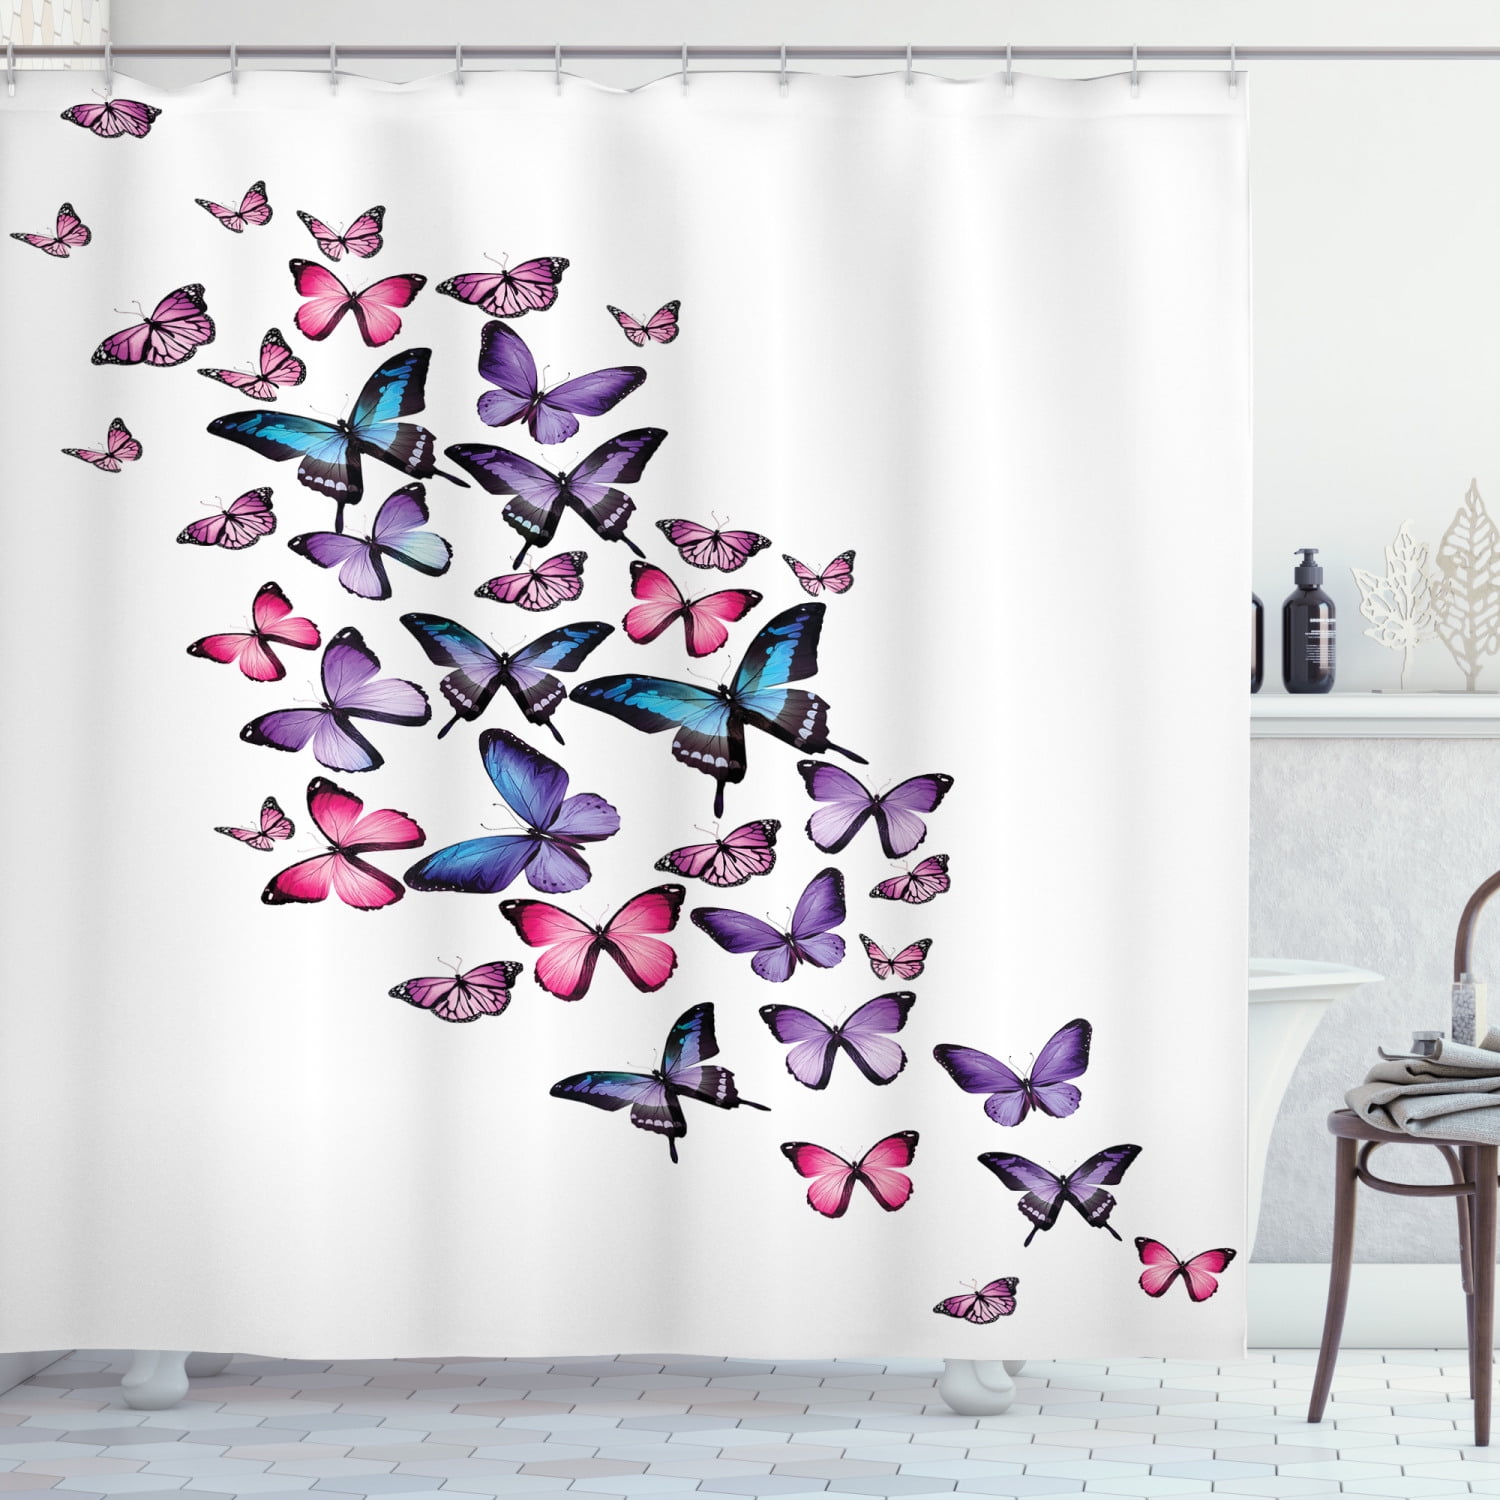 Details about   Phoenix Tail Butterfly & Lotus Shower Curtain Bathroom Decor Fabric 12hooks 71in 